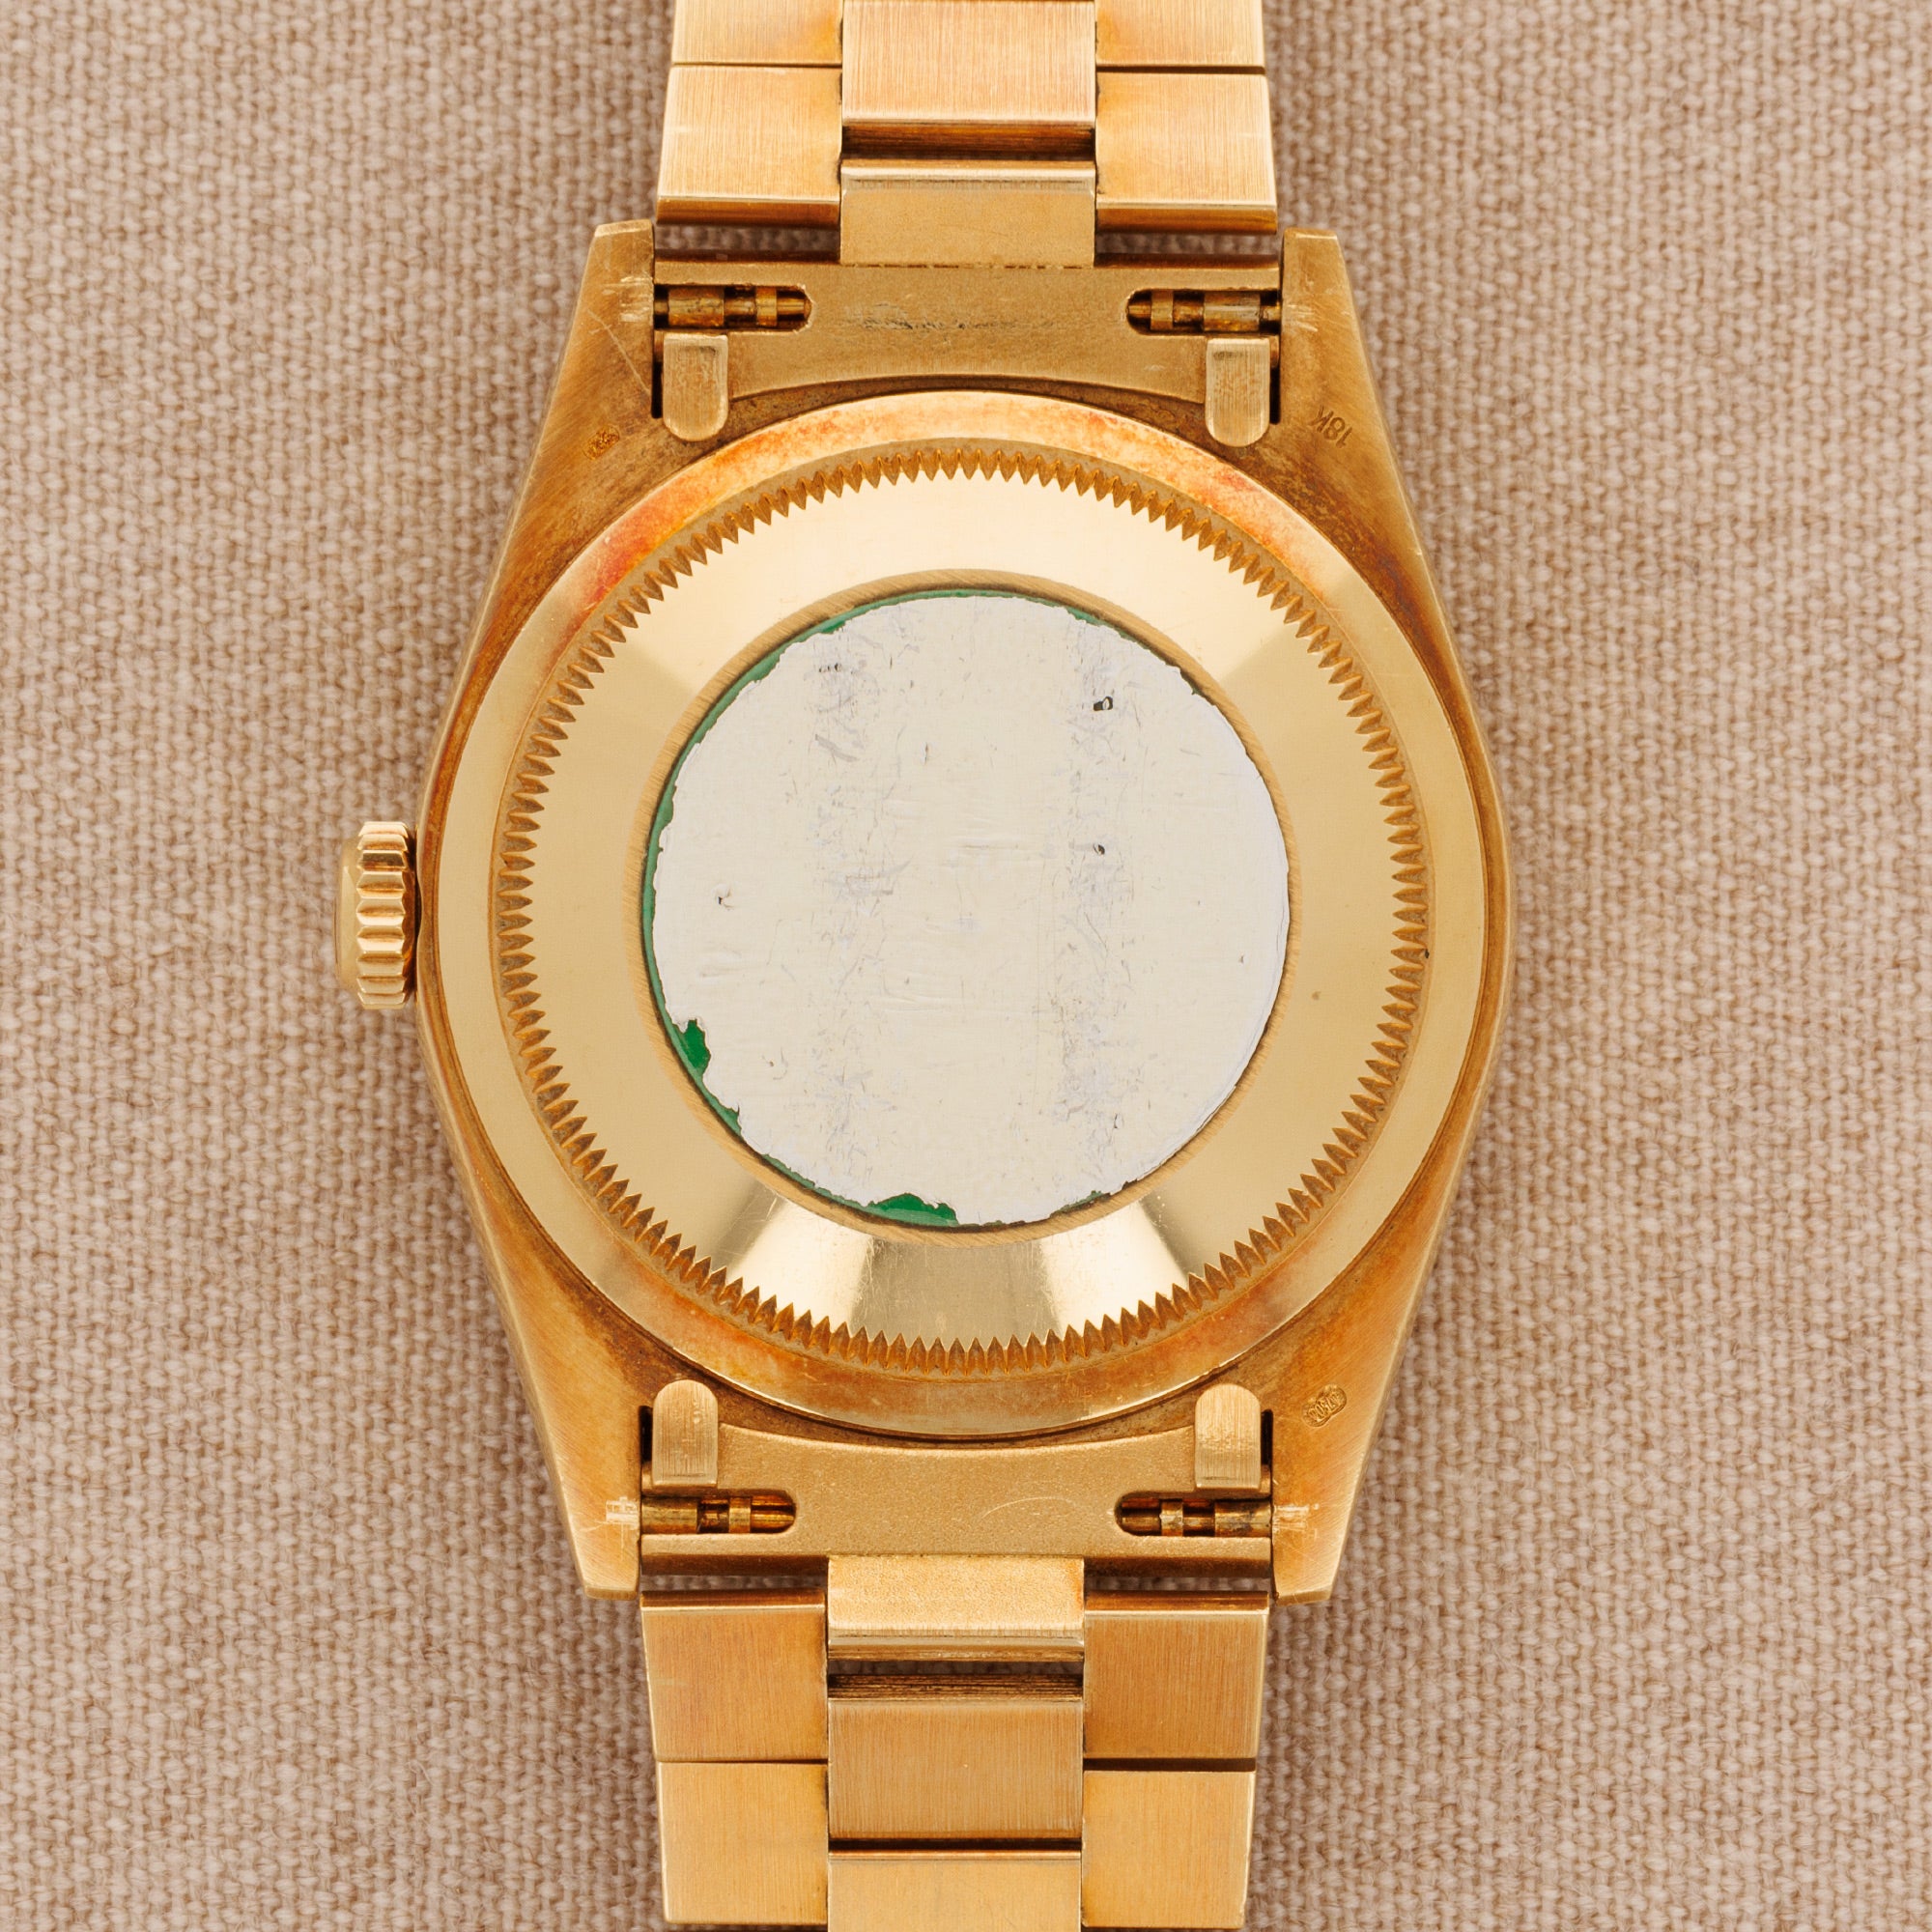 Rolex - Rolex Yellow Gold Day Date Ref. 18248 with Factory Bark Finish - The Keystone Watches